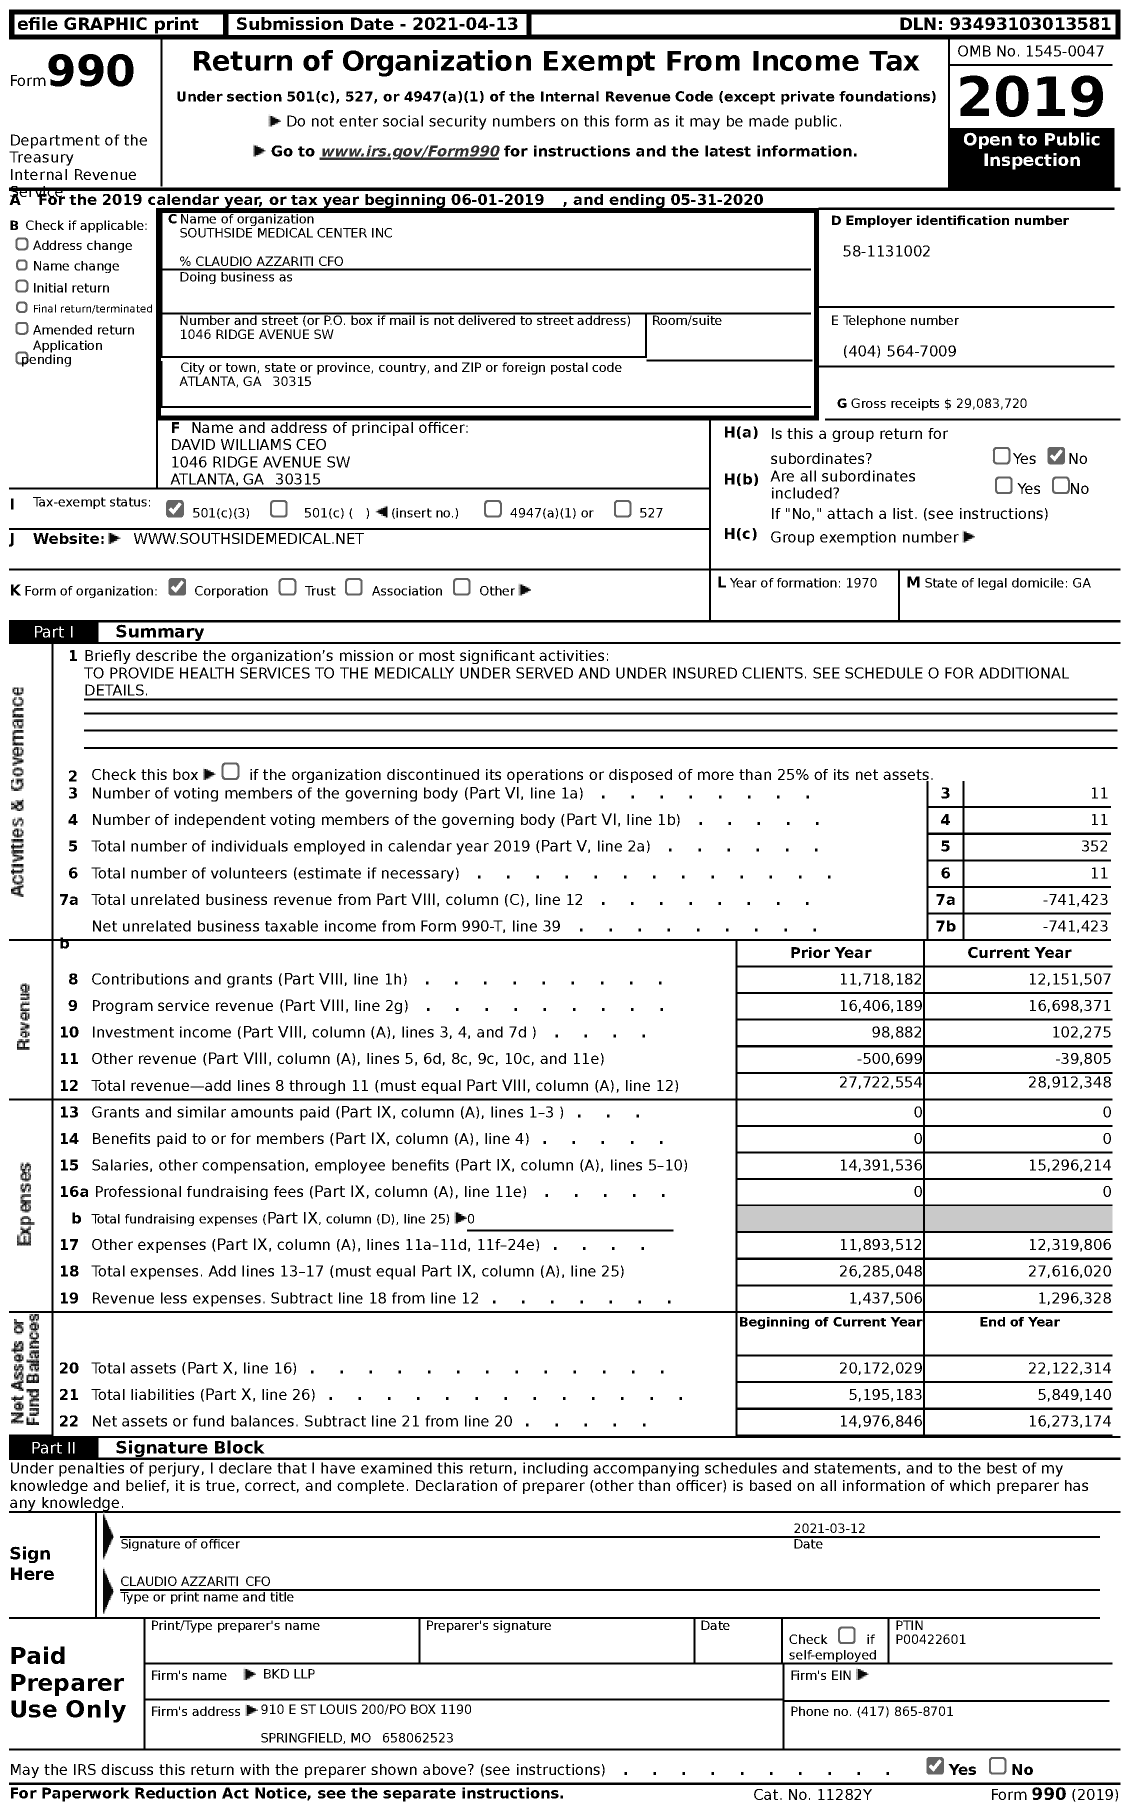 Image of first page of 2019 Form 990 for Southside Medical Center (SMC)